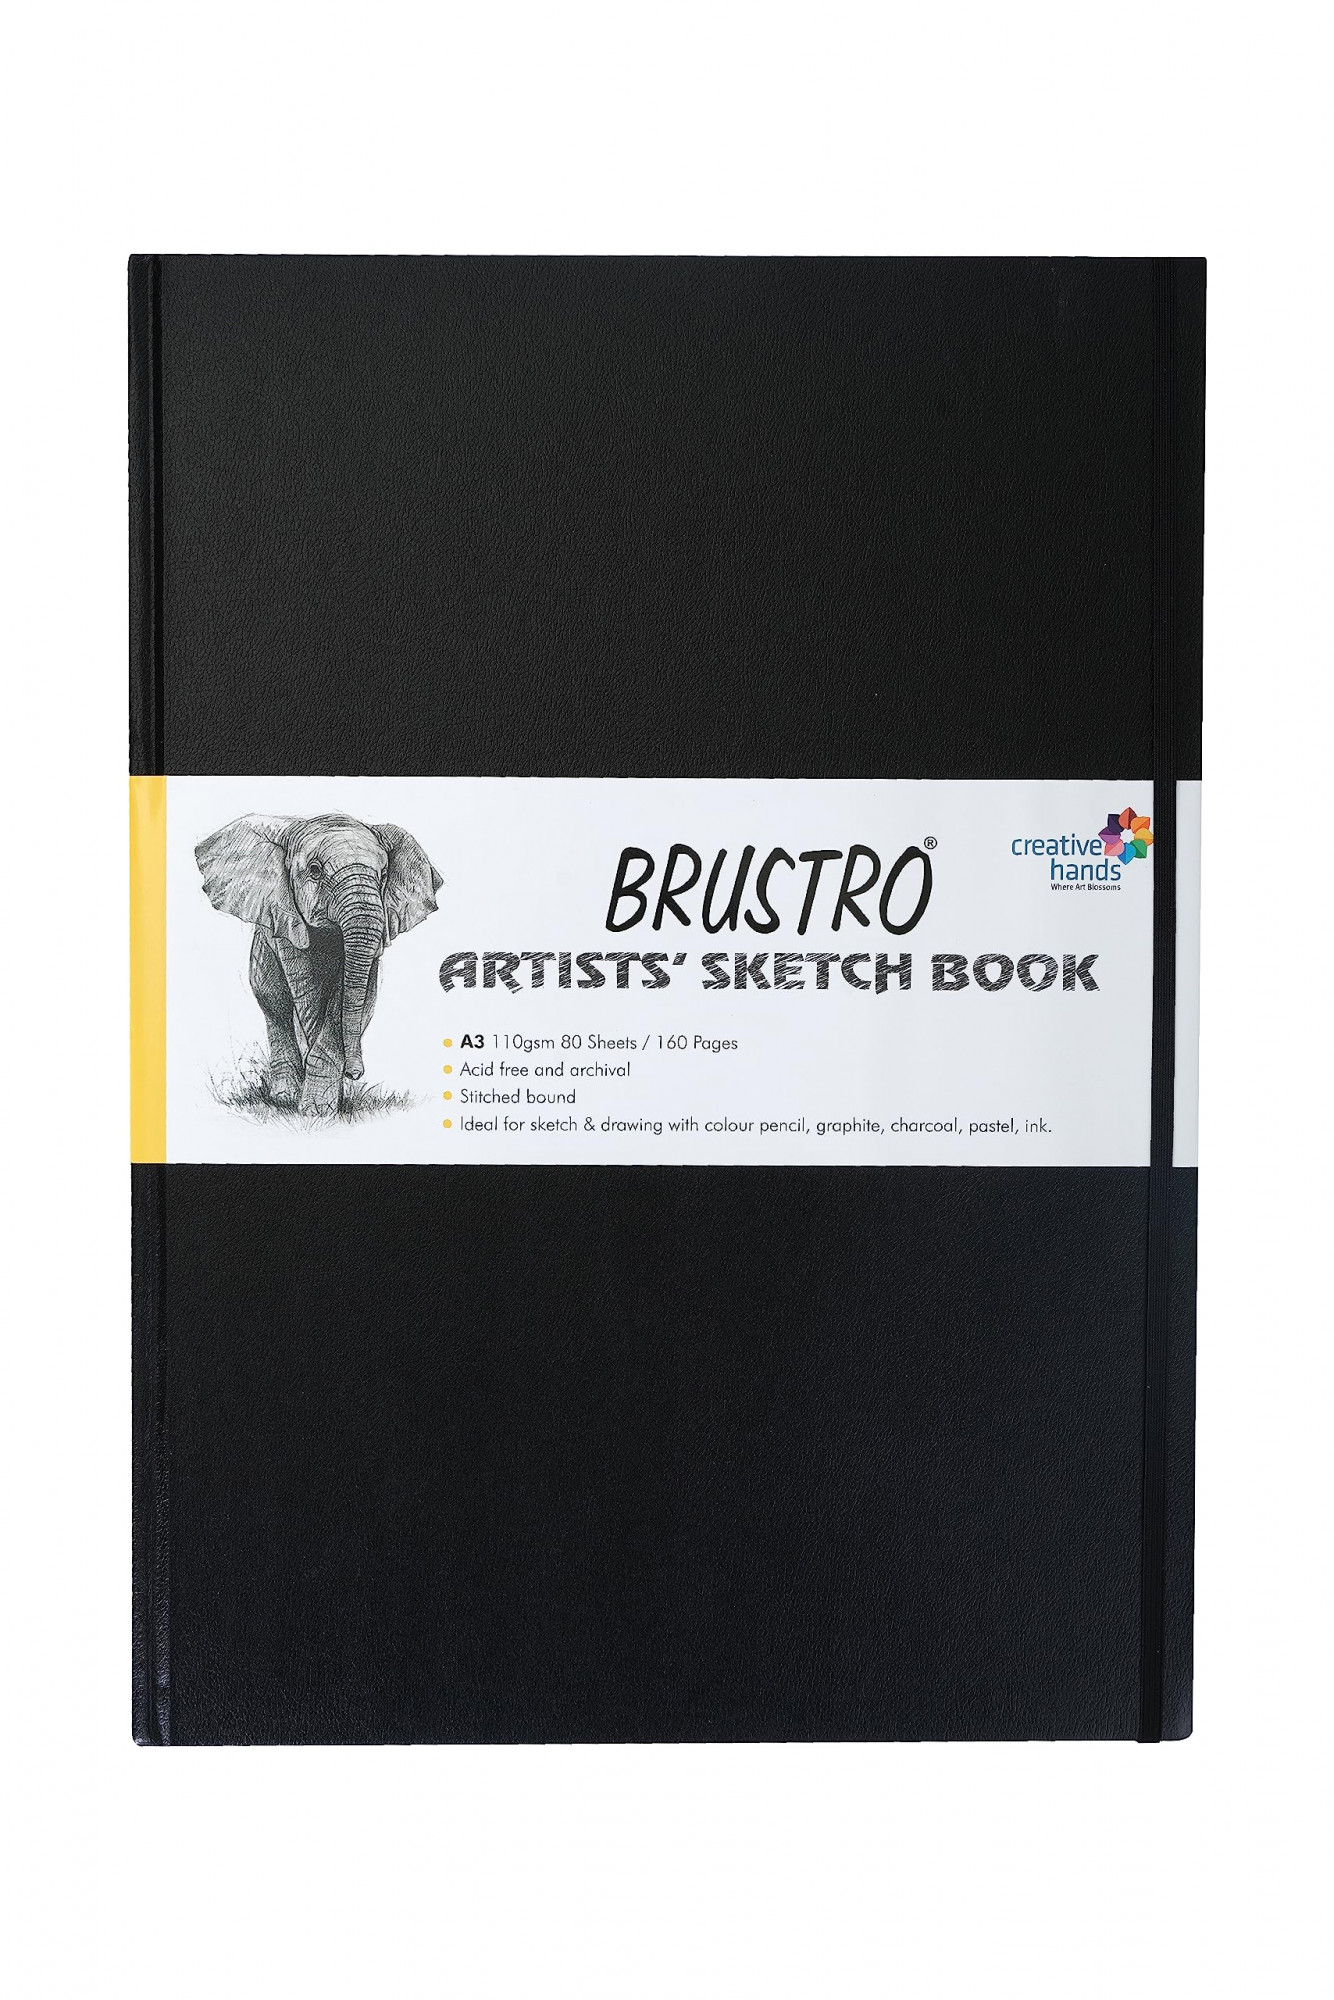 Brustro Artists Stitched Bound Sketch Book, A3 Size, 160 Pages, 110 GSM,Size A3 Stitched